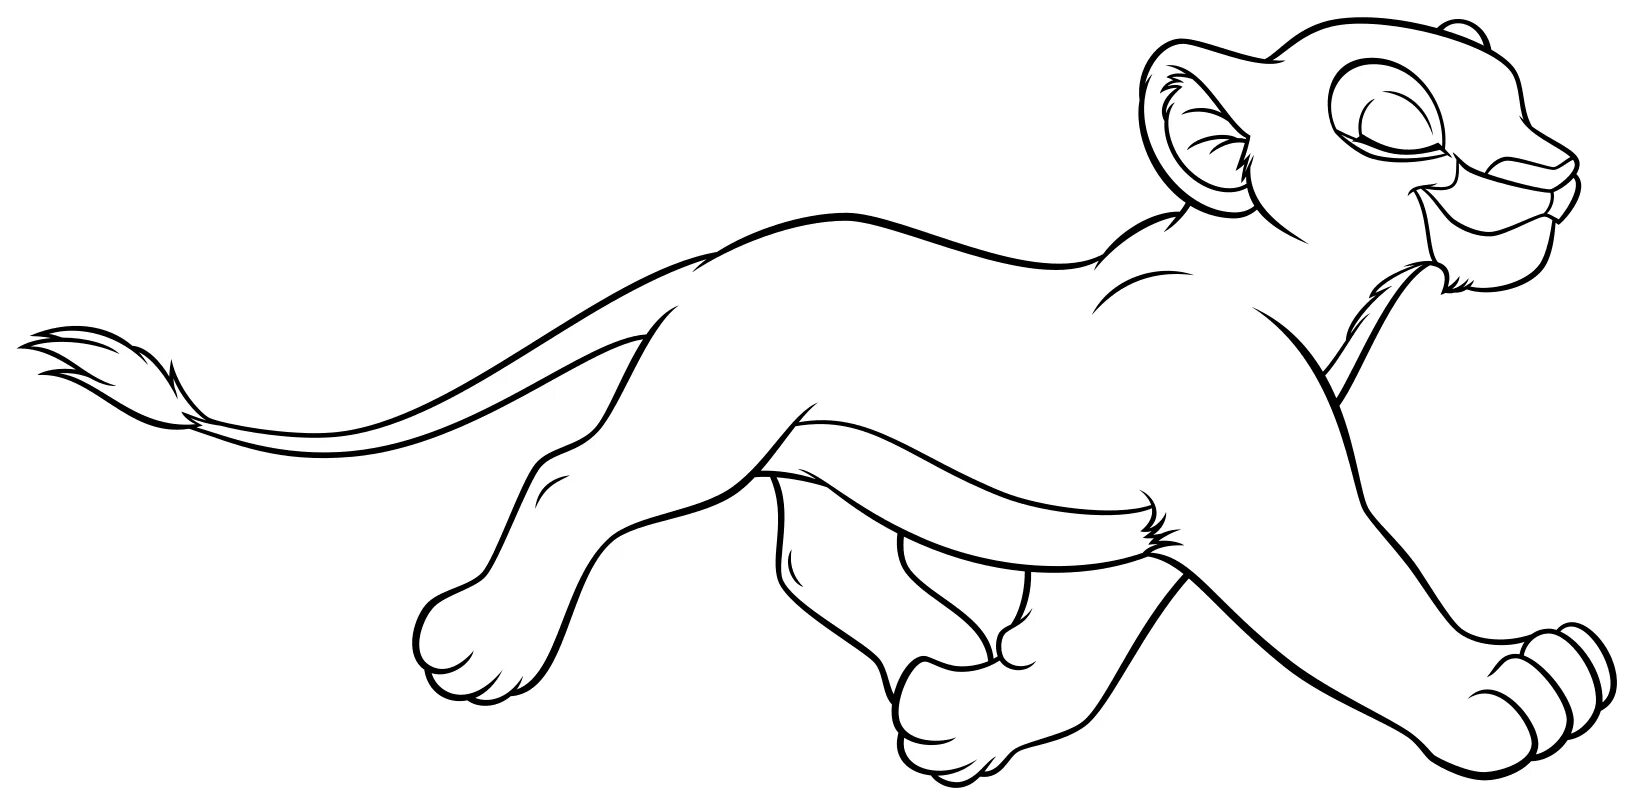 Exciting lion king coloring book for kids